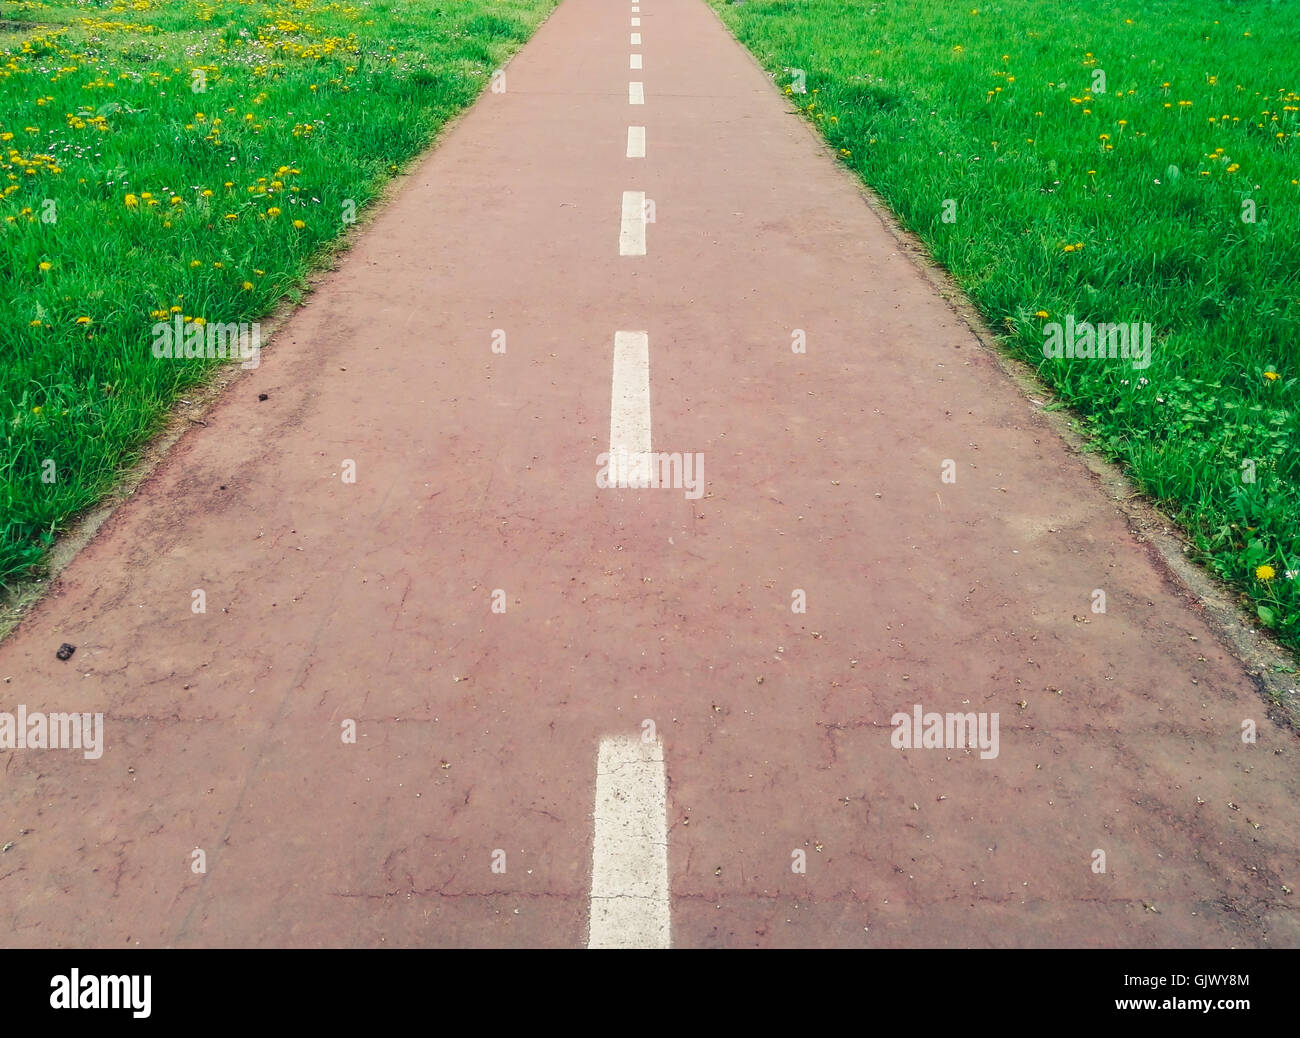 Bicycle path and green grass Stock Photo